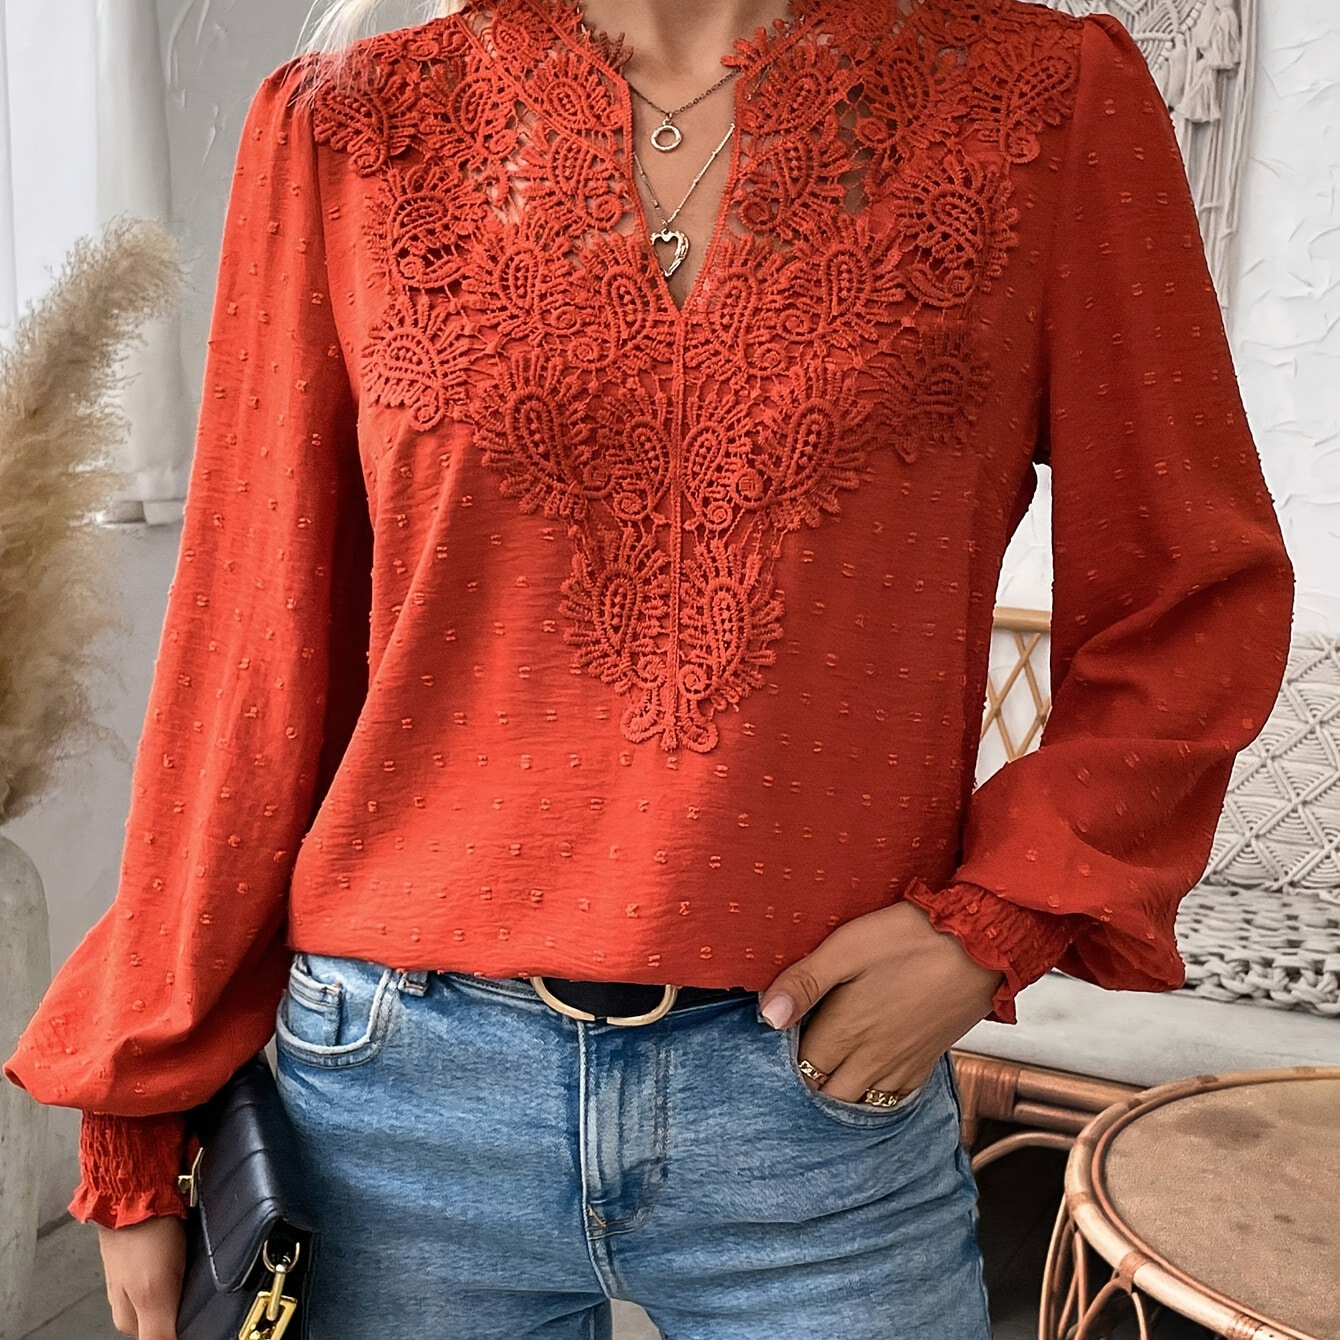 

Lace Splicing Swiss Dot V-neck Blouse, Elegant Long Sleeve Blouse Top For Spring & Fall, Women's Clothing